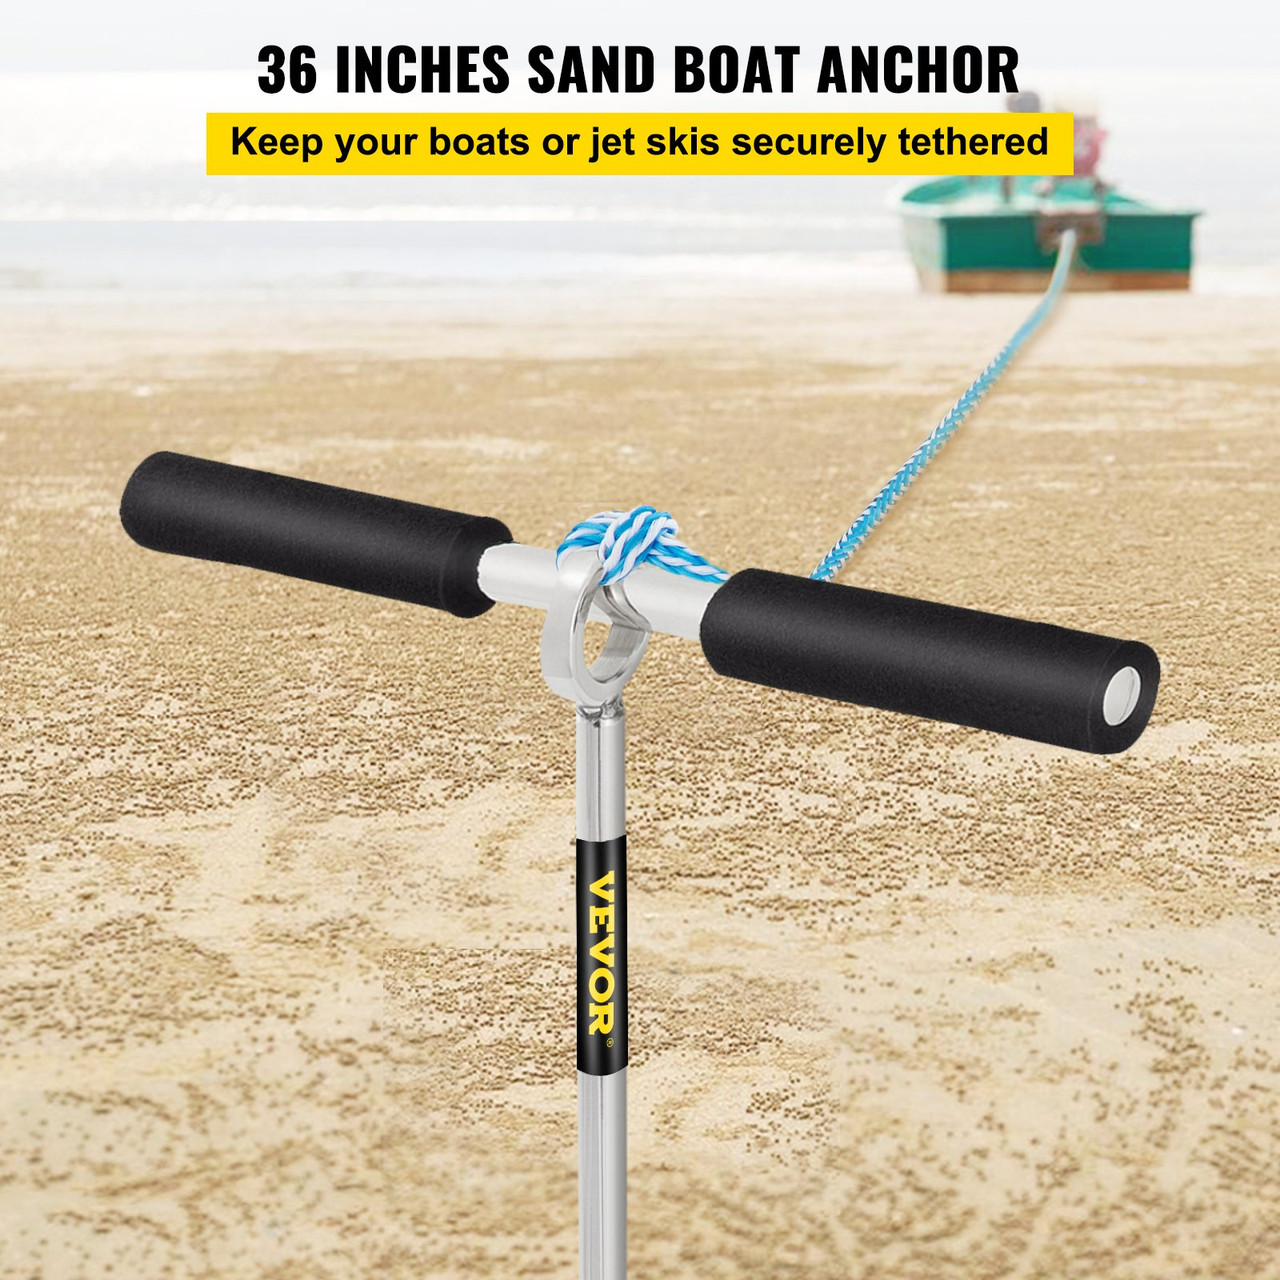 Sand Anchor, 36" Length Auger to The Beach and Sandbar, 316 Stainless Steel Screw Anchor w/Removable Handle, Bungee Line & Carry Bag, for Jet Ski PWC Pontoon Kayak